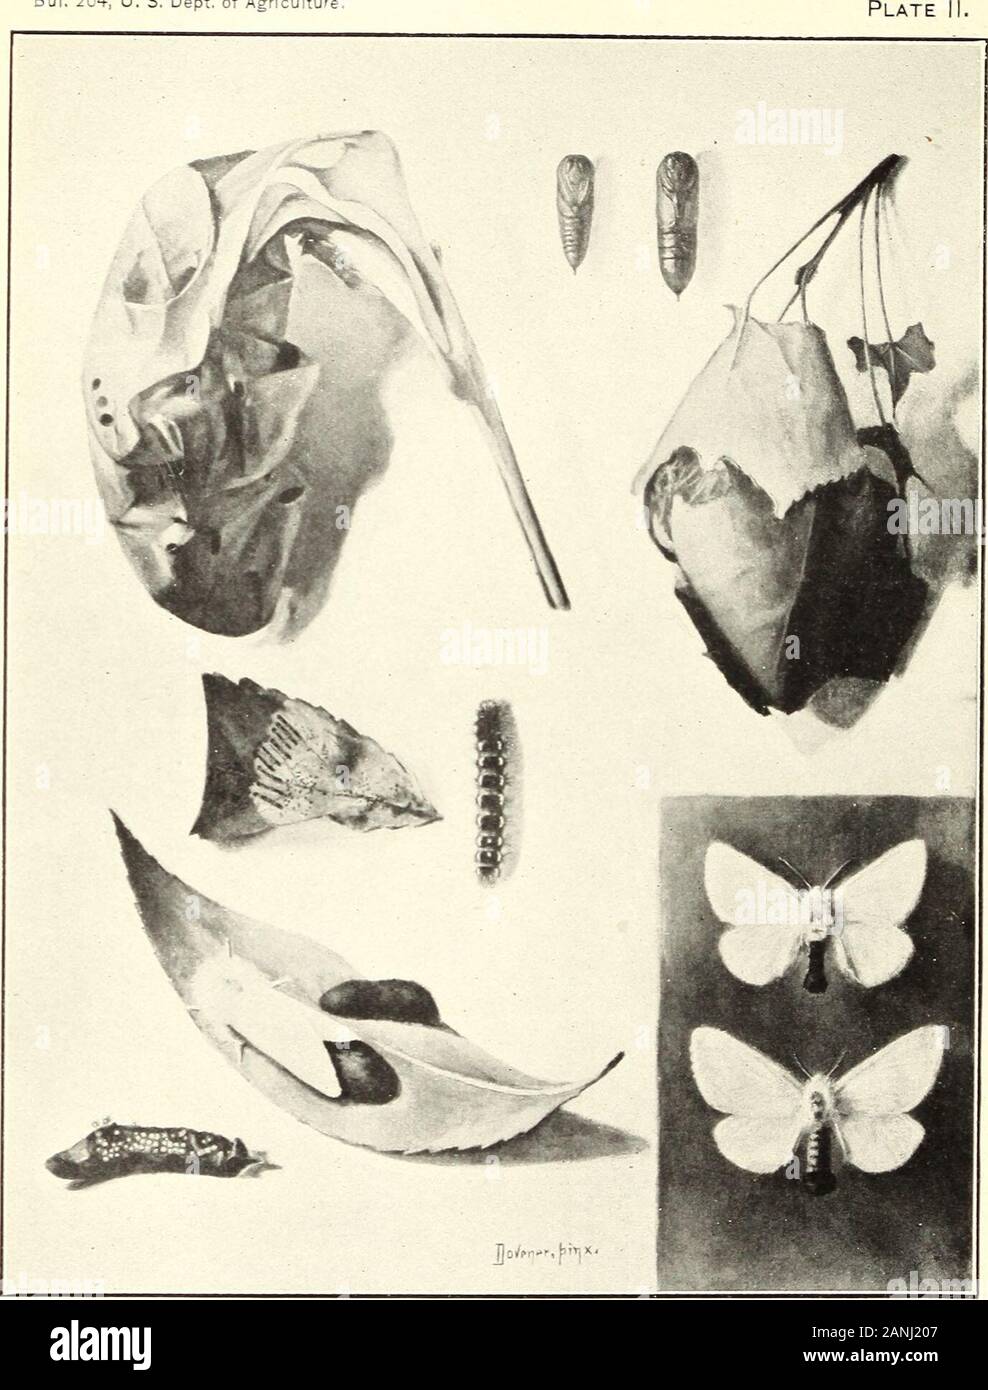 Report on the gipsy moth work in New England . The Gipsy Moth (Porthetria dispar). Upper left, male moth with wings folded ; just below this, female moth with wings spread ;just below this, male moth with wings spread; lower left, female moth, enlarged; topcenter, male pupa at left, female pupa at right; center, larva; on branch, at top, newlyformed pupa; on branch; just below this, larva ready to pupate; on branch, left side,pupre; on branch, center, egg cluster, on branch, at bottom, female moth depositing eggcluster. All slightly reduced except figure at lower left. (From Howard and Fiske.) Stock Photo